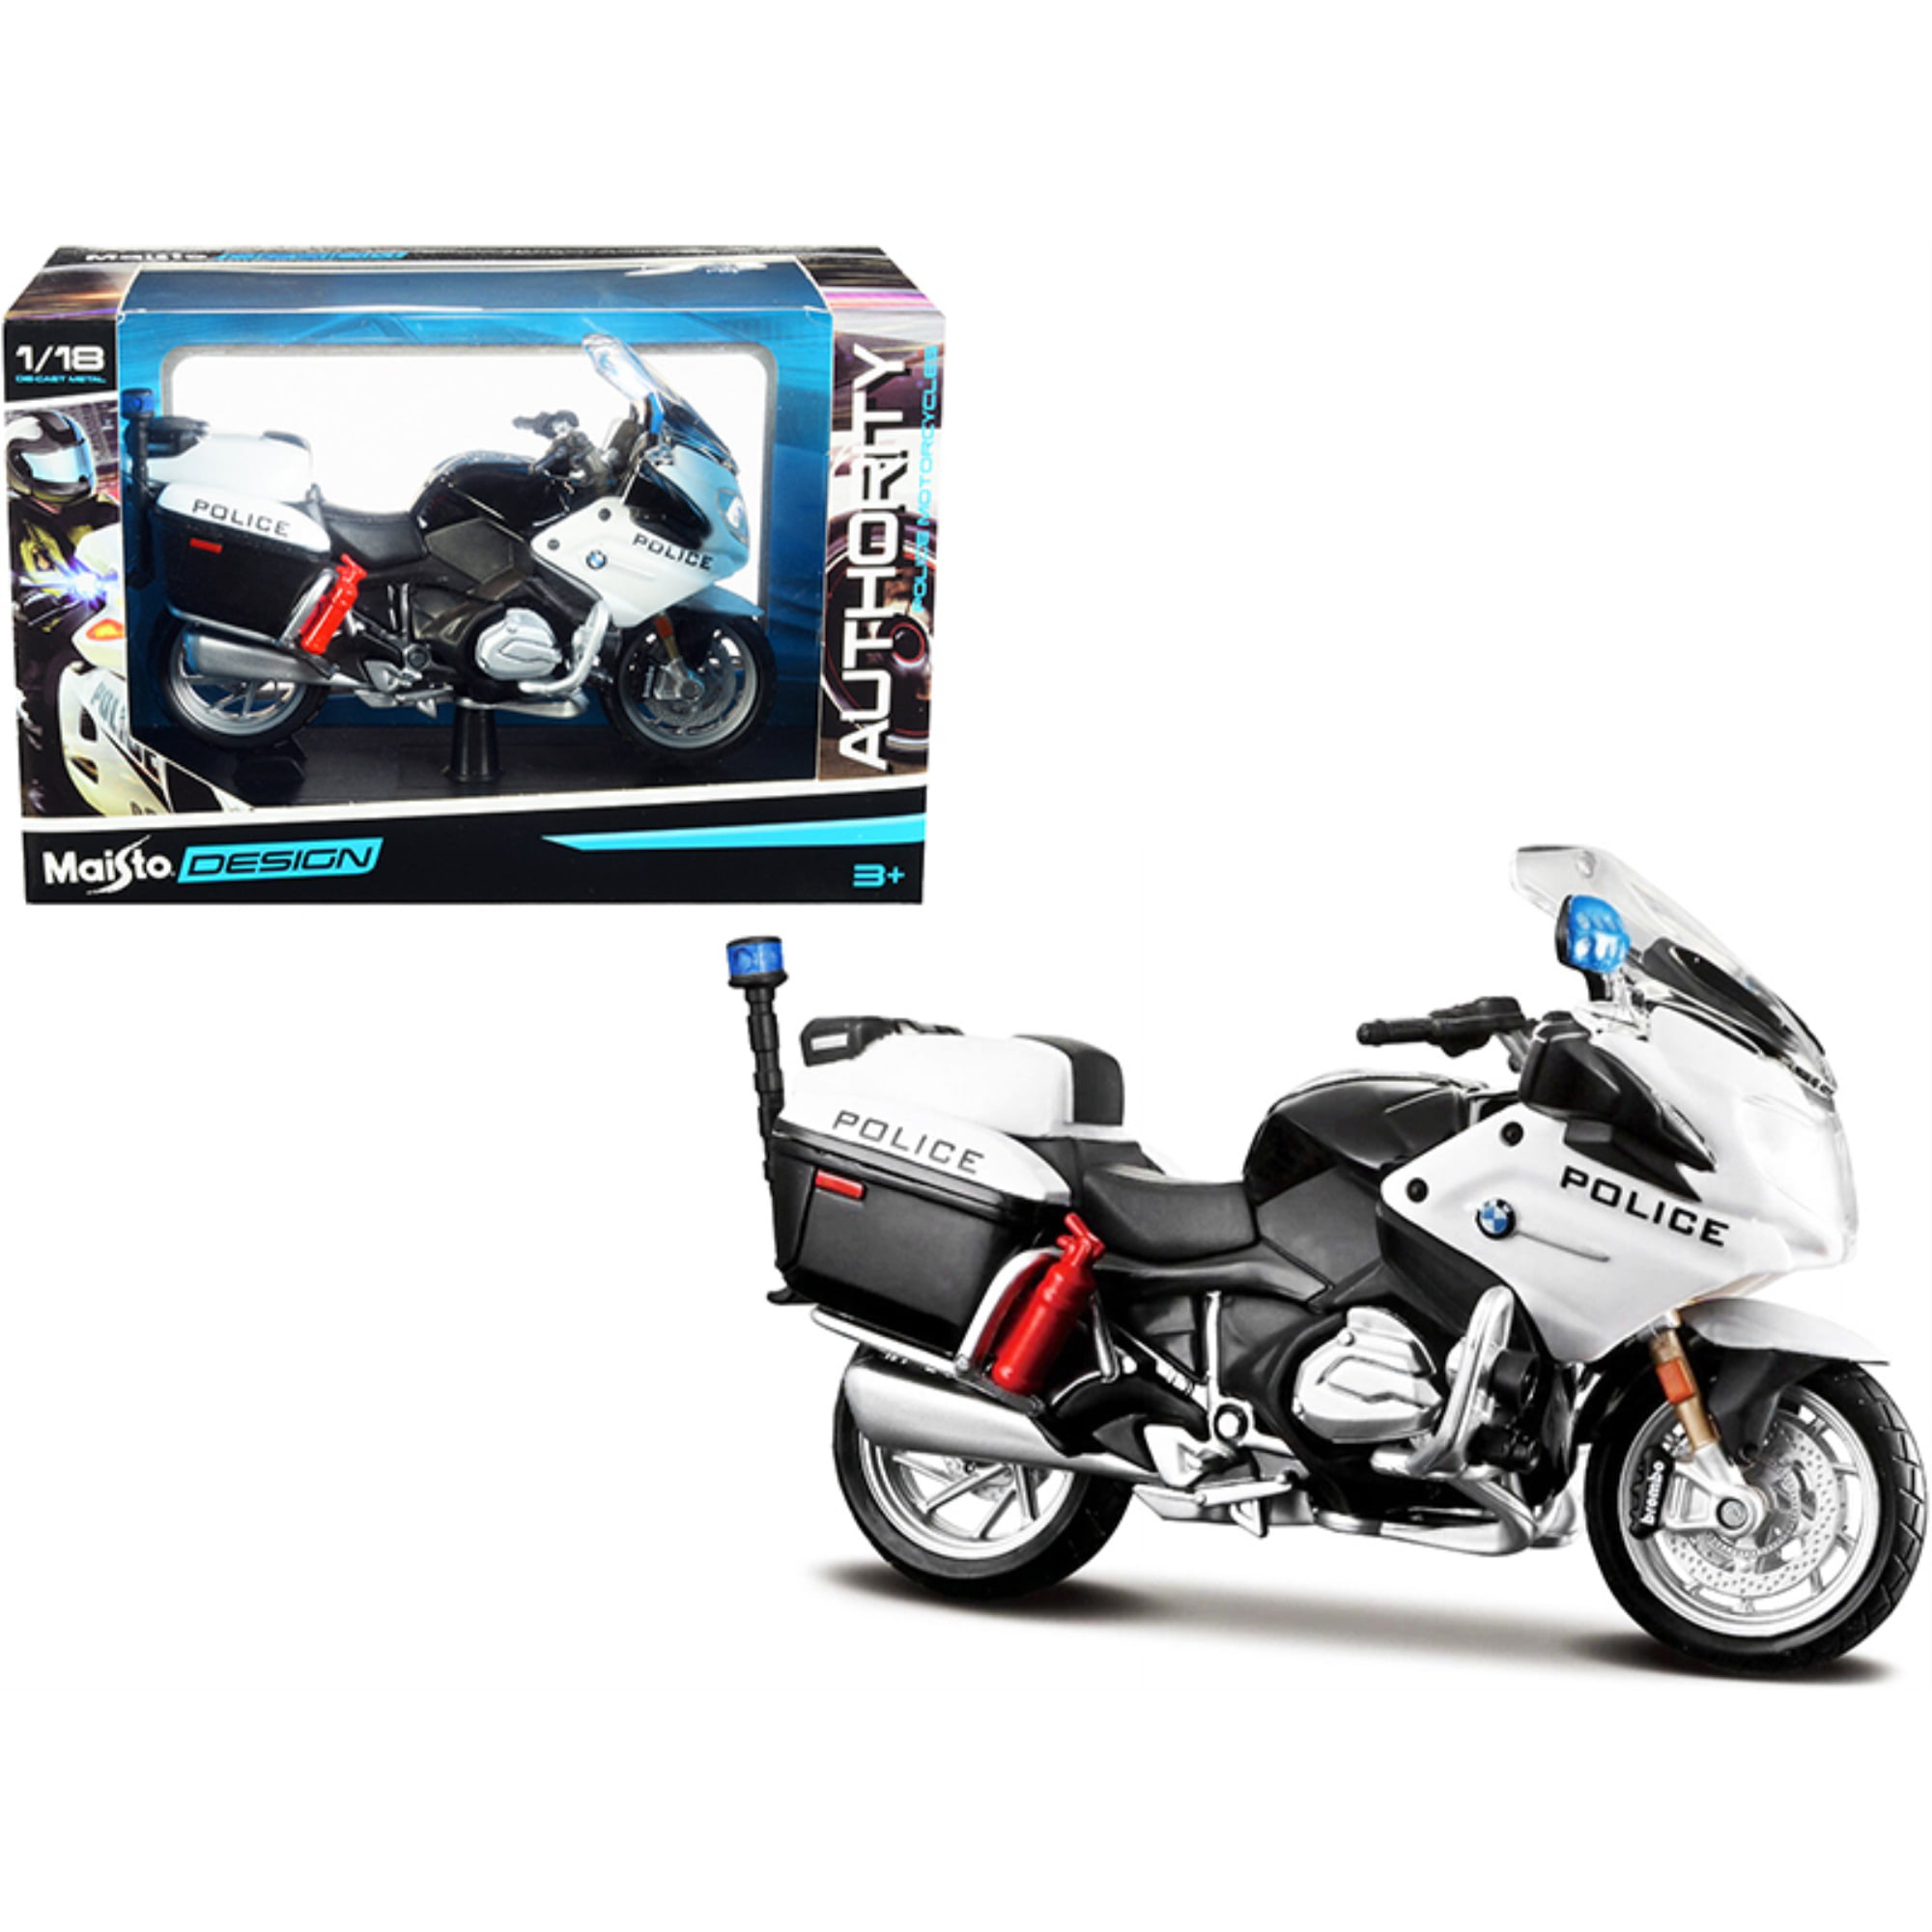 Maisto 4.5" BMW R 1200 RT CHP AUTHORITY POLICE MOTORCYCLE DIECAST MODEL 1:18 